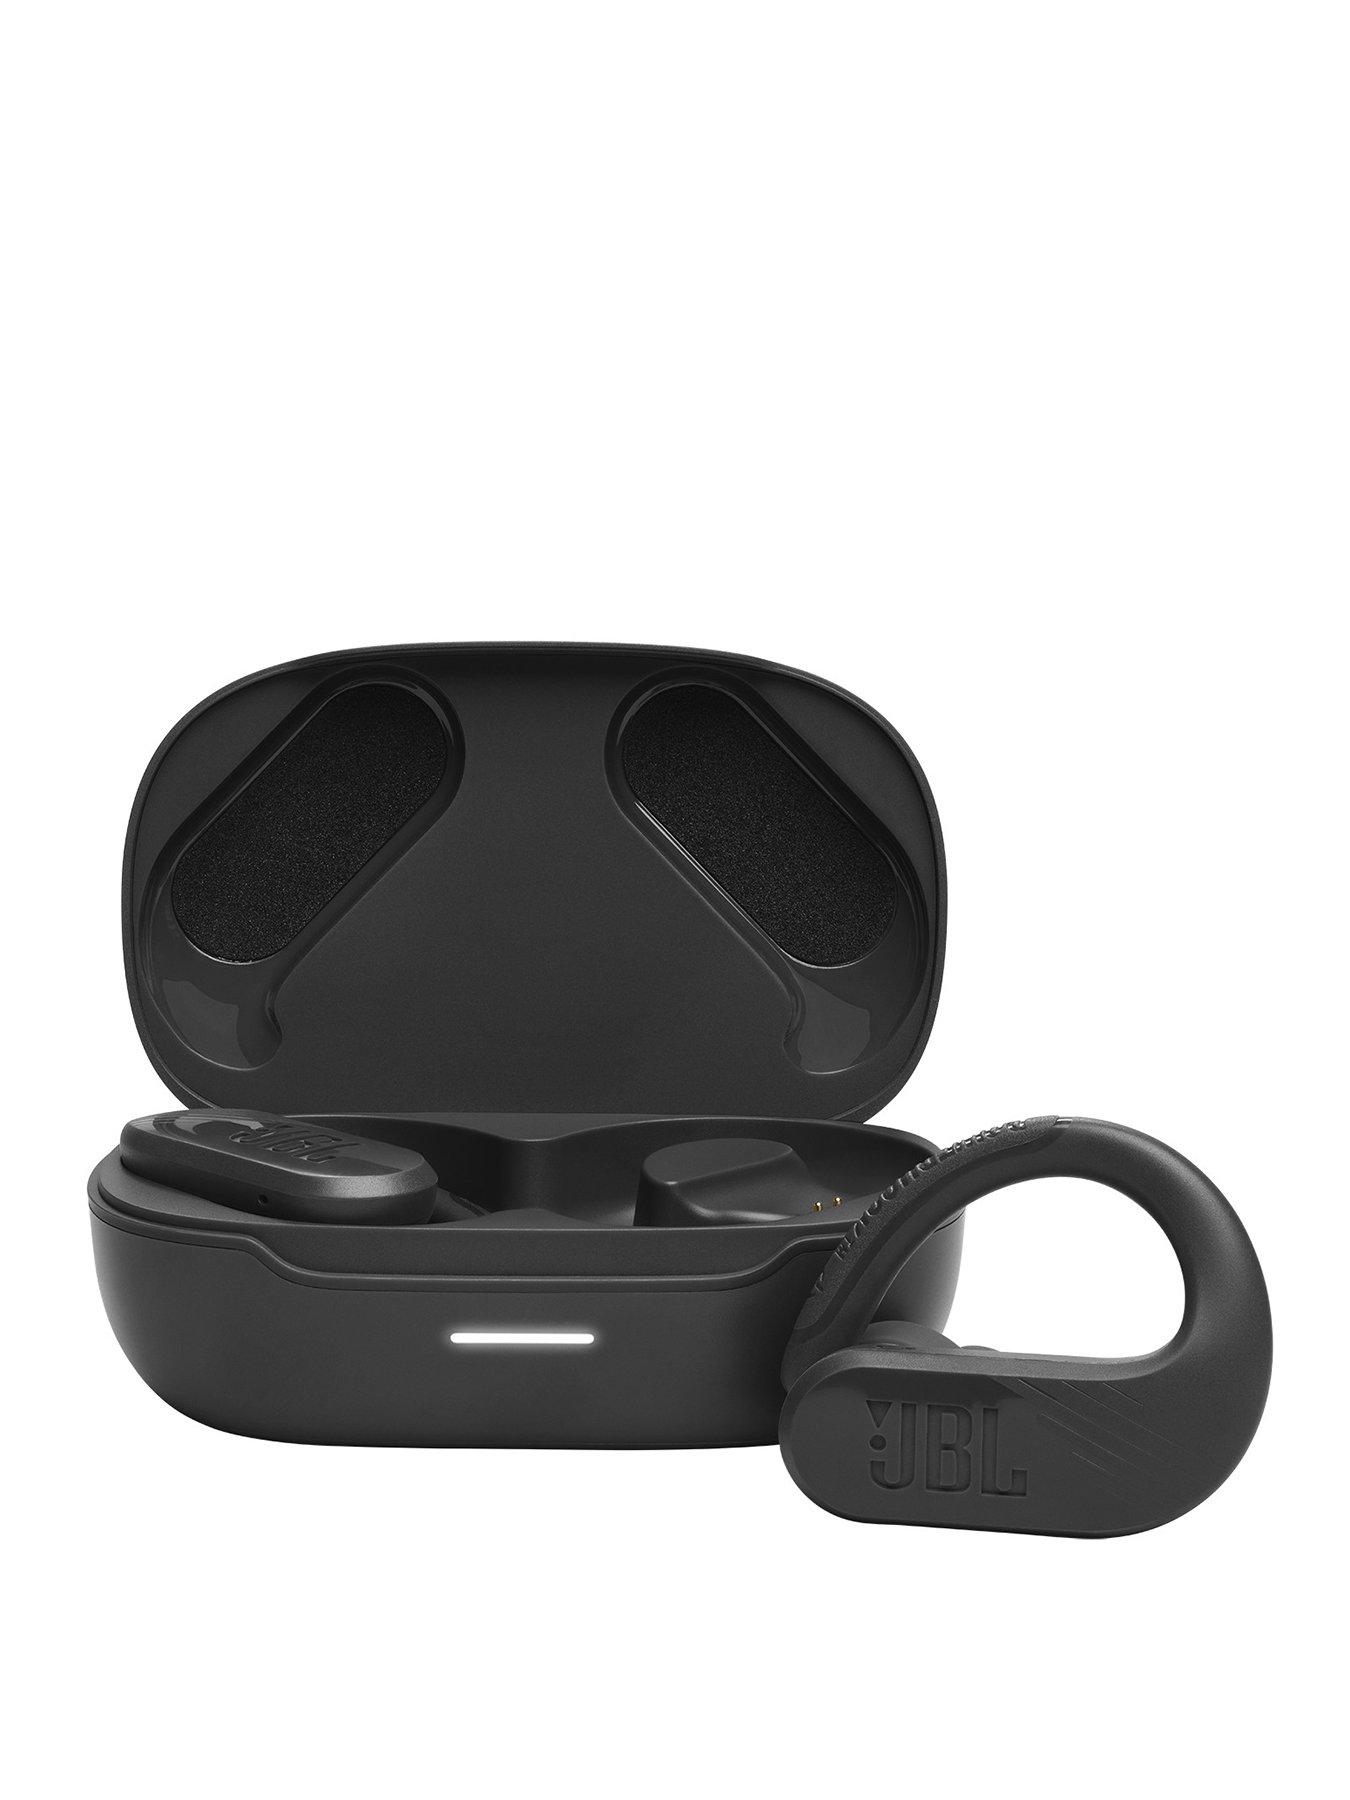 True wireless sports earbuds with ANC